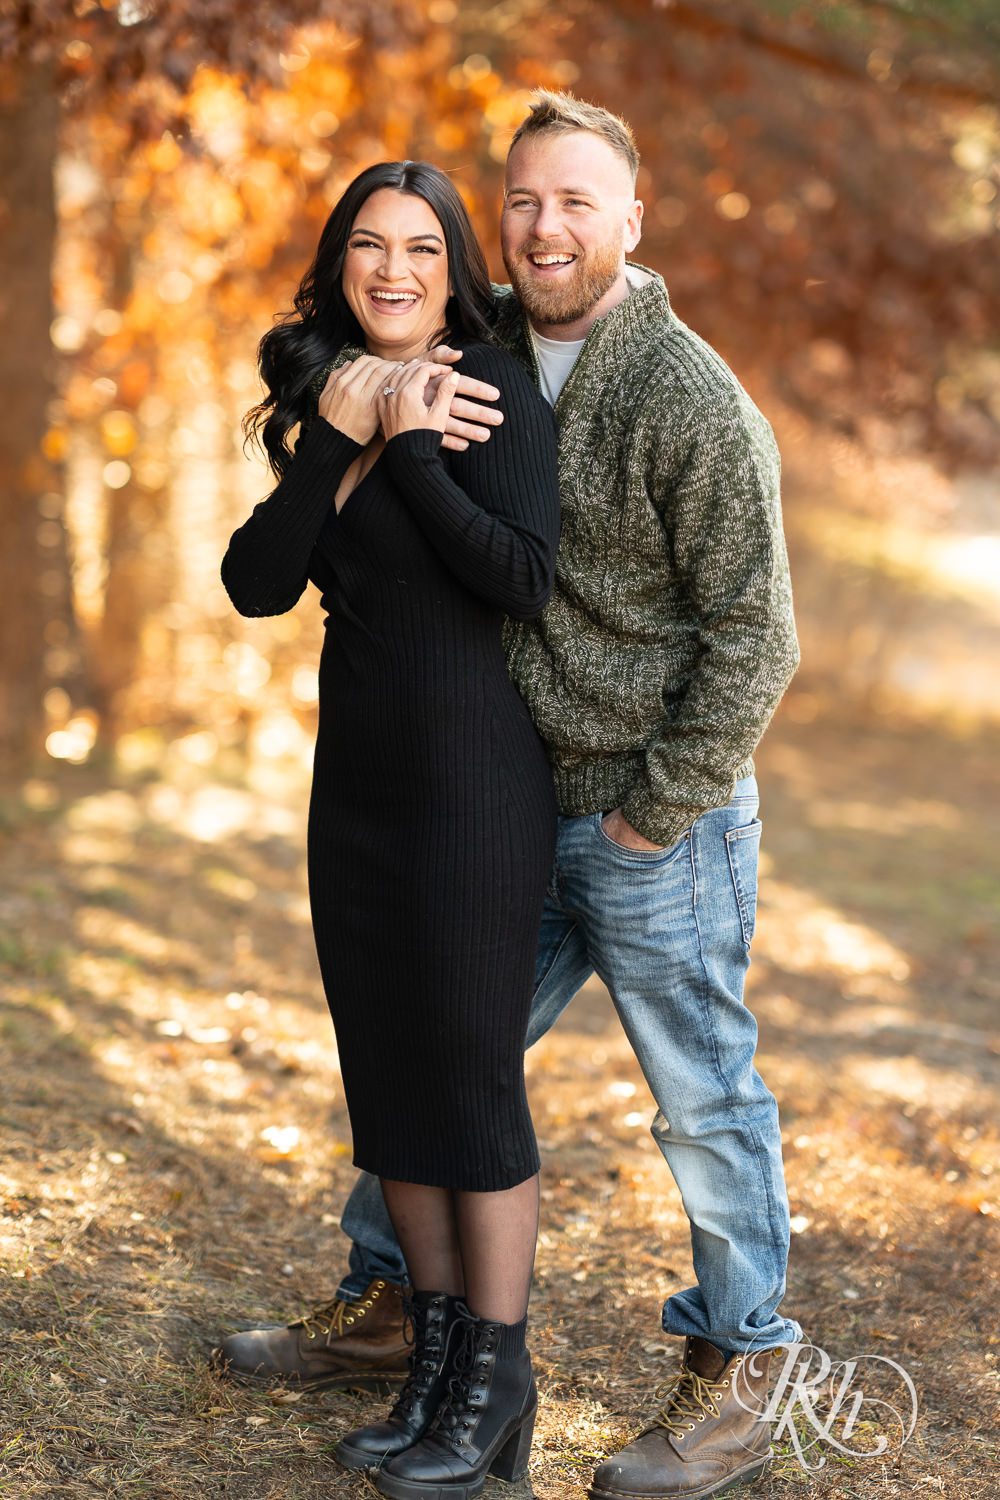 Man in sweater and jeans and woman in black dress smile at Lebanon Hills Regional Park in Eagan, Minnesota for December morning engagement photography.